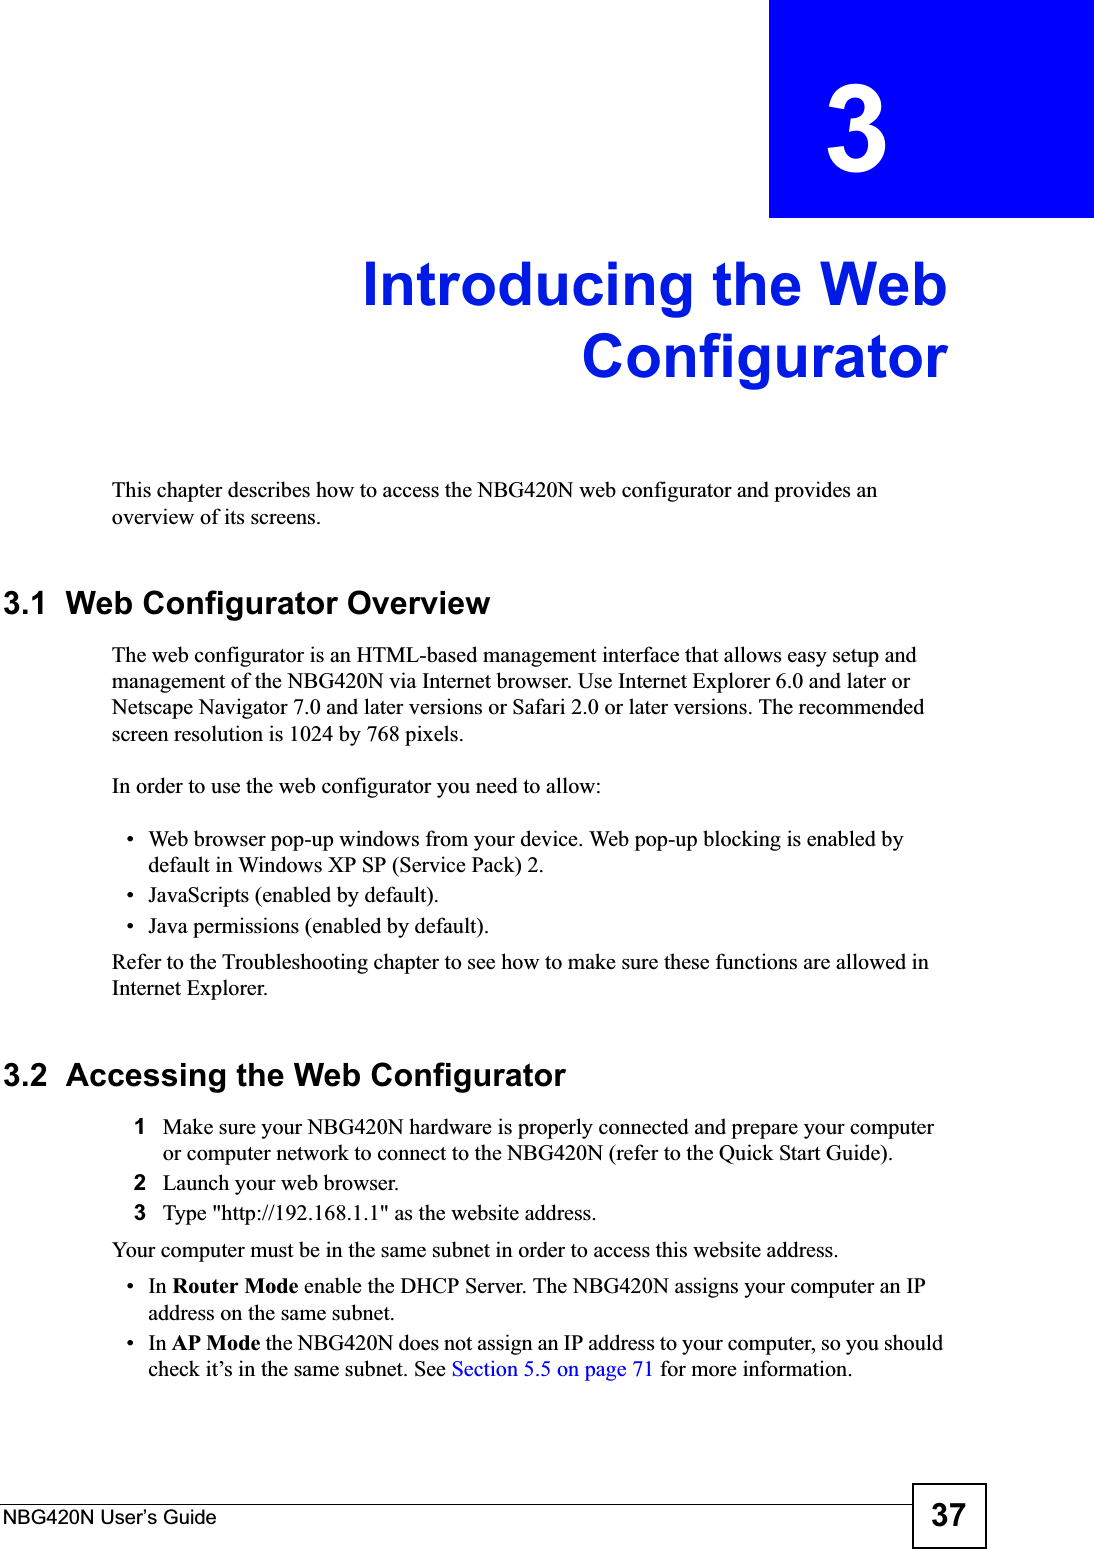 NBG420N User’s Guide 37CHAPTER  3 Introducing the WebConfiguratorThis chapter describes how to access the NBG420N web configurator and provides an overview of its screens.3.1  Web Configurator OverviewThe web configurator is an HTML-based management interface that allows easy setup and management of the NBG420N via Internet browser. Use Internet Explorer 6.0 and later or Netscape Navigator 7.0 and later versions or Safari 2.0 or later versions. The recommended screen resolution is 1024 by 768 pixels.In order to use the web configurator you need to allow:• Web browser pop-up windows from your device. Web pop-up blocking is enabled by default in Windows XP SP (Service Pack) 2.• JavaScripts (enabled by default).• Java permissions (enabled by default).Refer to the Troubleshooting chapter to see how to make sure these functions are allowed in Internet Explorer.3.2  Accessing the Web Configurator1Make sure your NBG420N hardware is properly connected and prepare your computer or computer network to connect to the NBG420N (refer to the Quick Start Guide).2Launch your web browser.3Type &quot;http://192.168.1.1&quot; as the website address. Your computer must be in the same subnet in order to access this website address.•In Router Mode enable the DHCP Server. The NBG420N assigns your computer an IP address on the same subnet. •In AP Mode the NBG420N does not assign an IP address to your computer, so you should check it’s in the same subnet. See Section 5.5 on page 71 for more information.